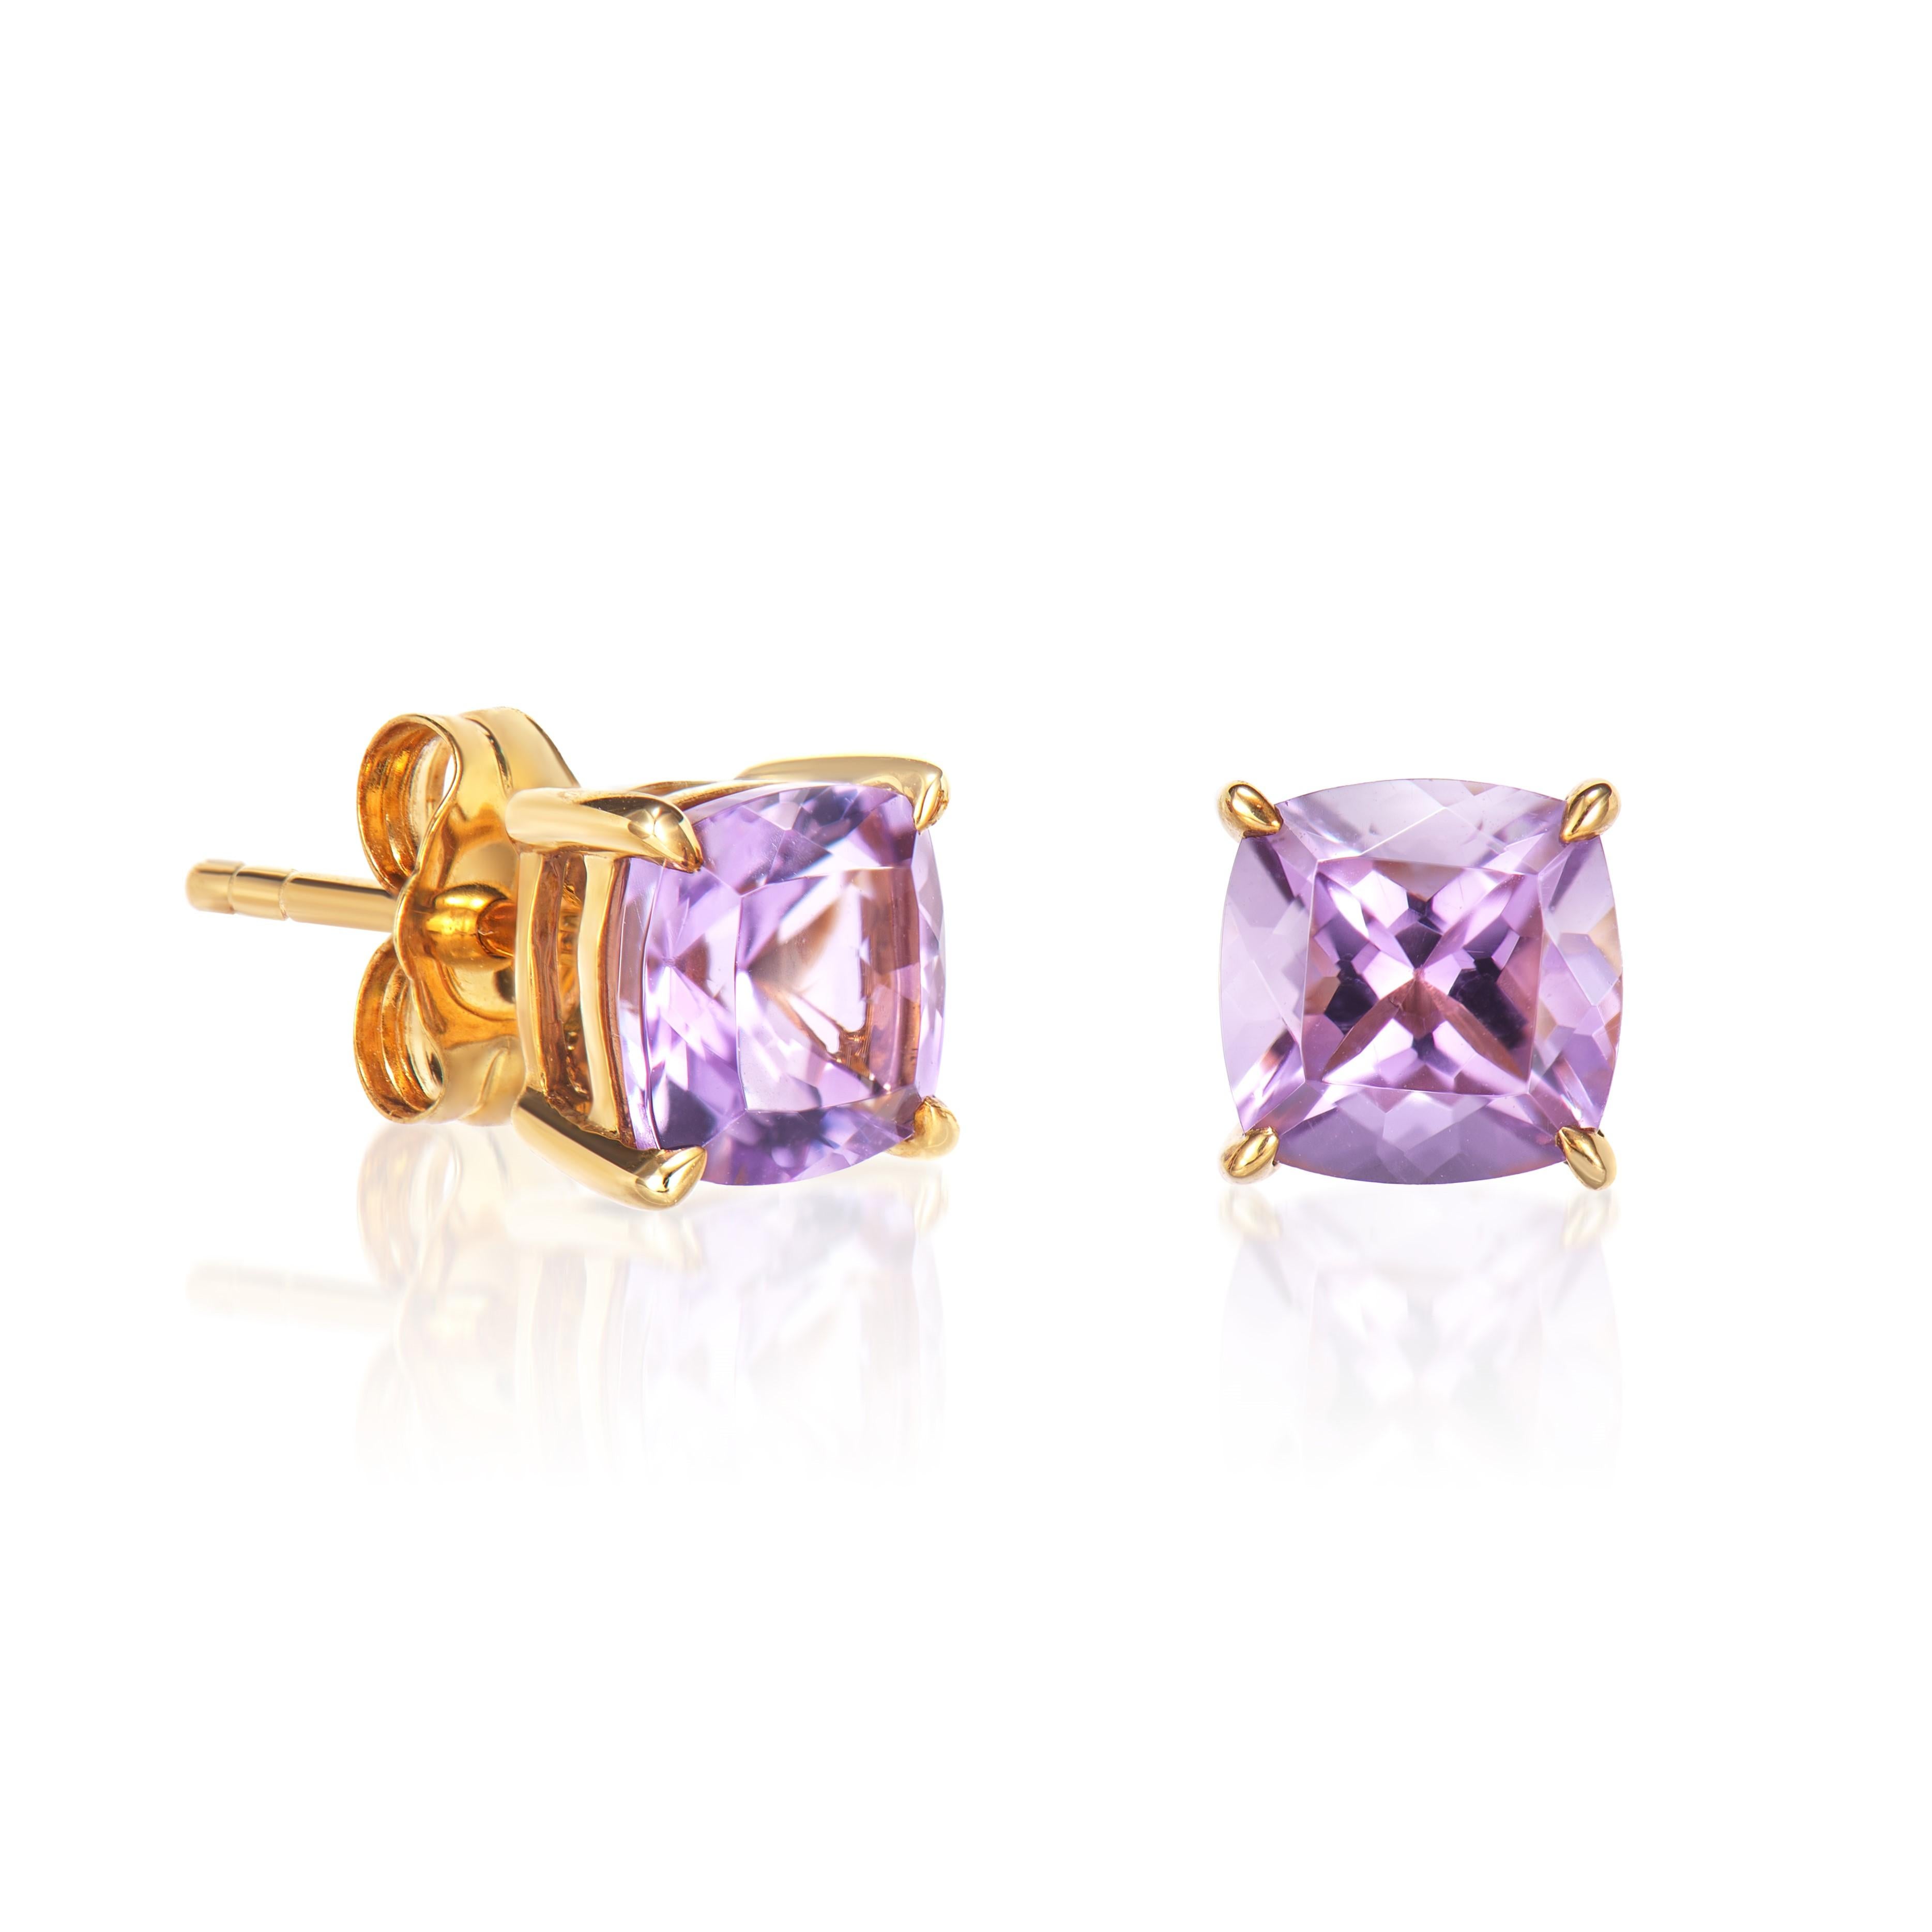 Presented A lovely collection of gems, including Amethyst, Sky Blue Topaz and Swiss Blue Topaz is perfect for people who value quality and want to wear it to any occasion or celebration. The yellow gold Amethyst Stud Earrings offer a classic yet